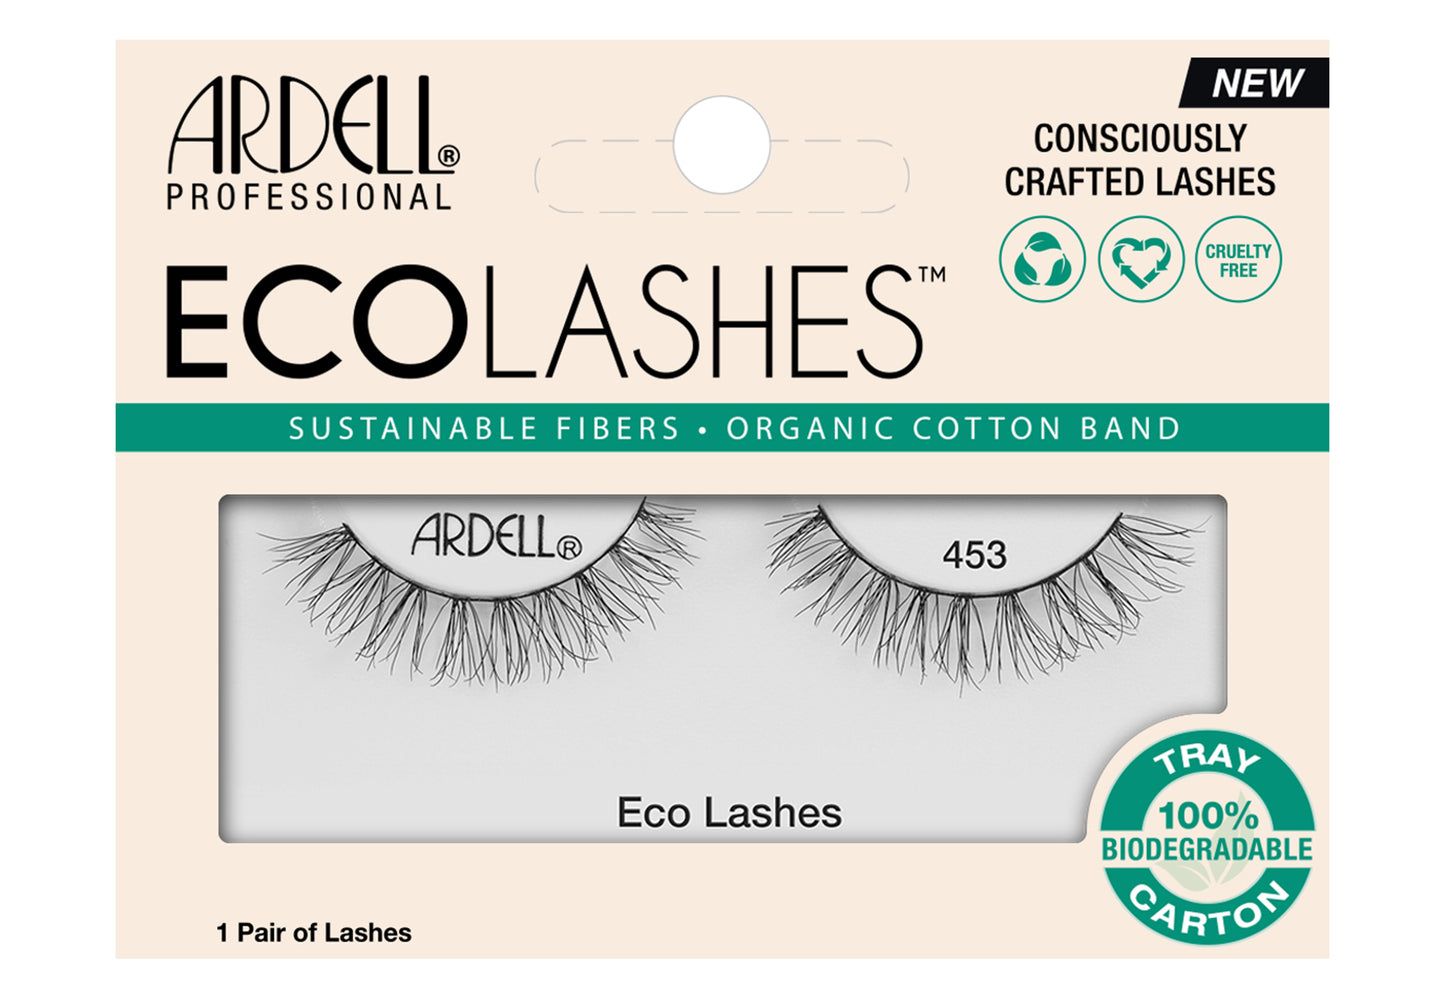 Frontview of a wall-hook ready retail pack of Ardell's Ecolashes 453 with printed text